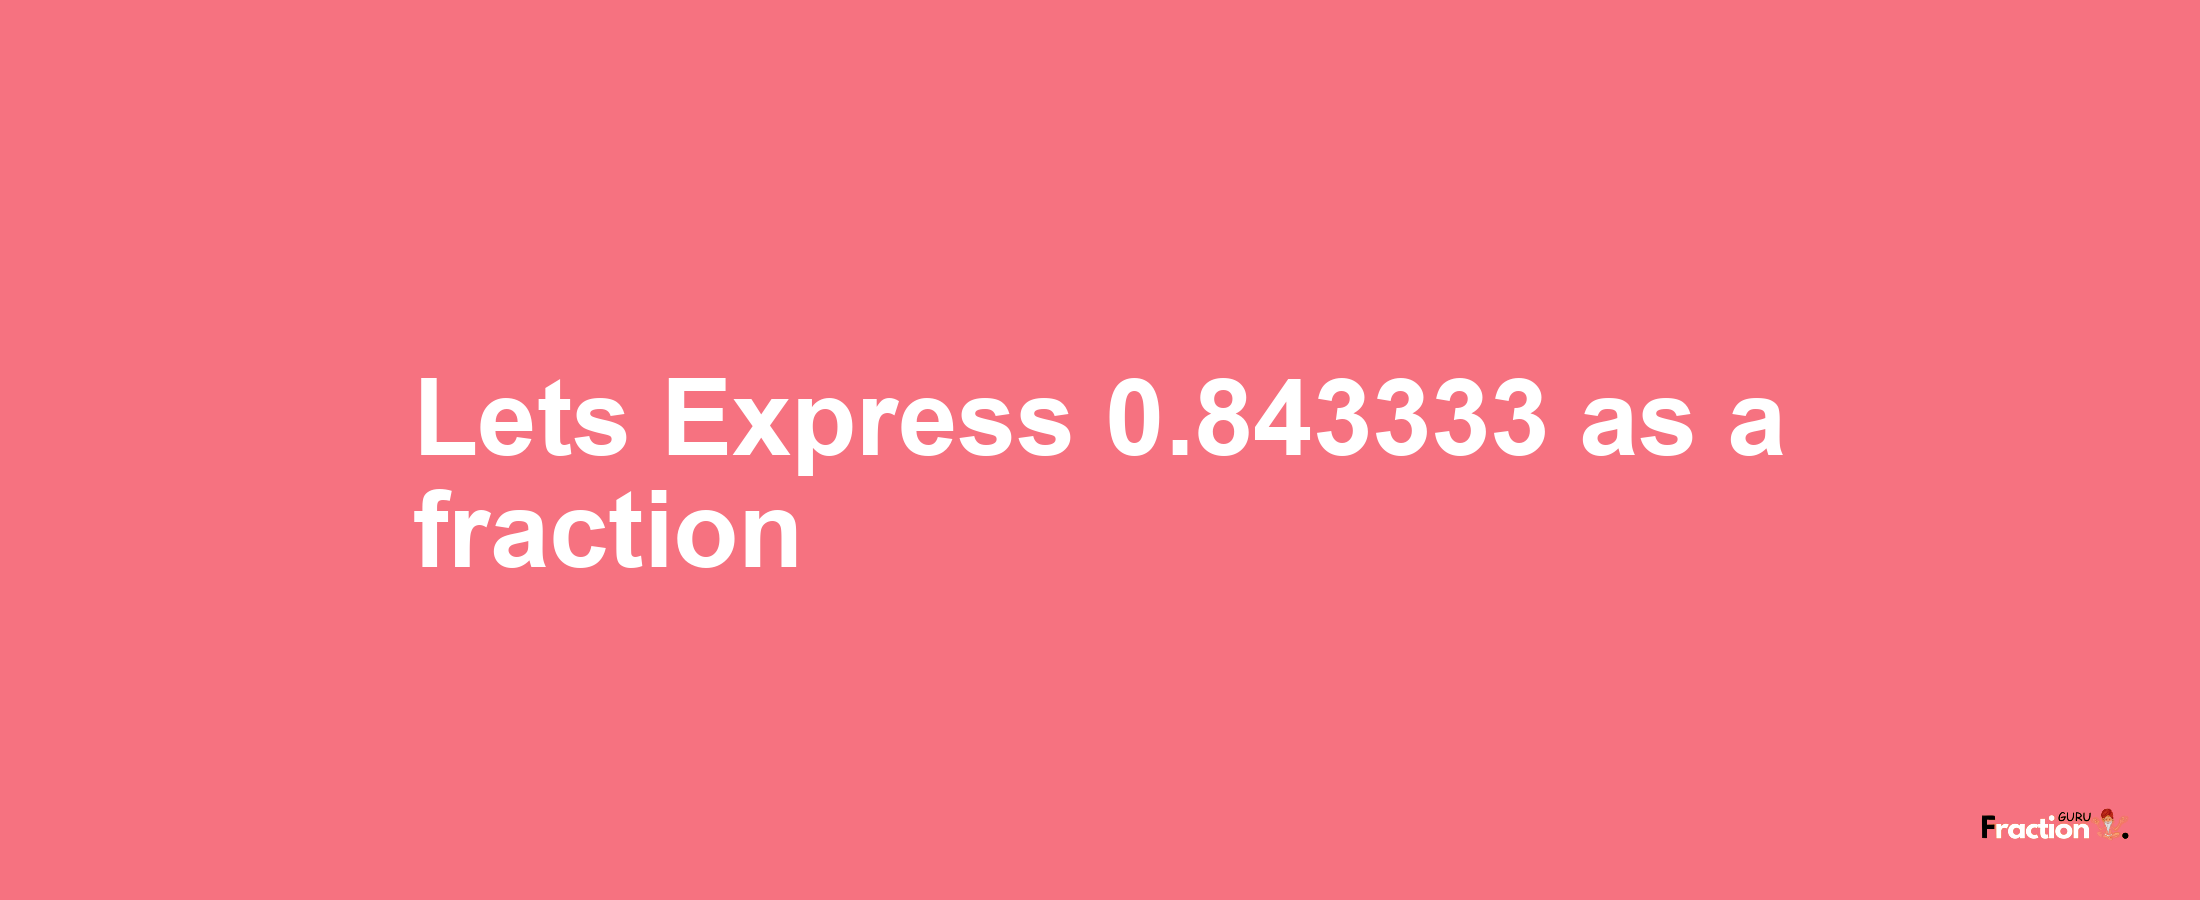 Lets Express 0.843333 as afraction